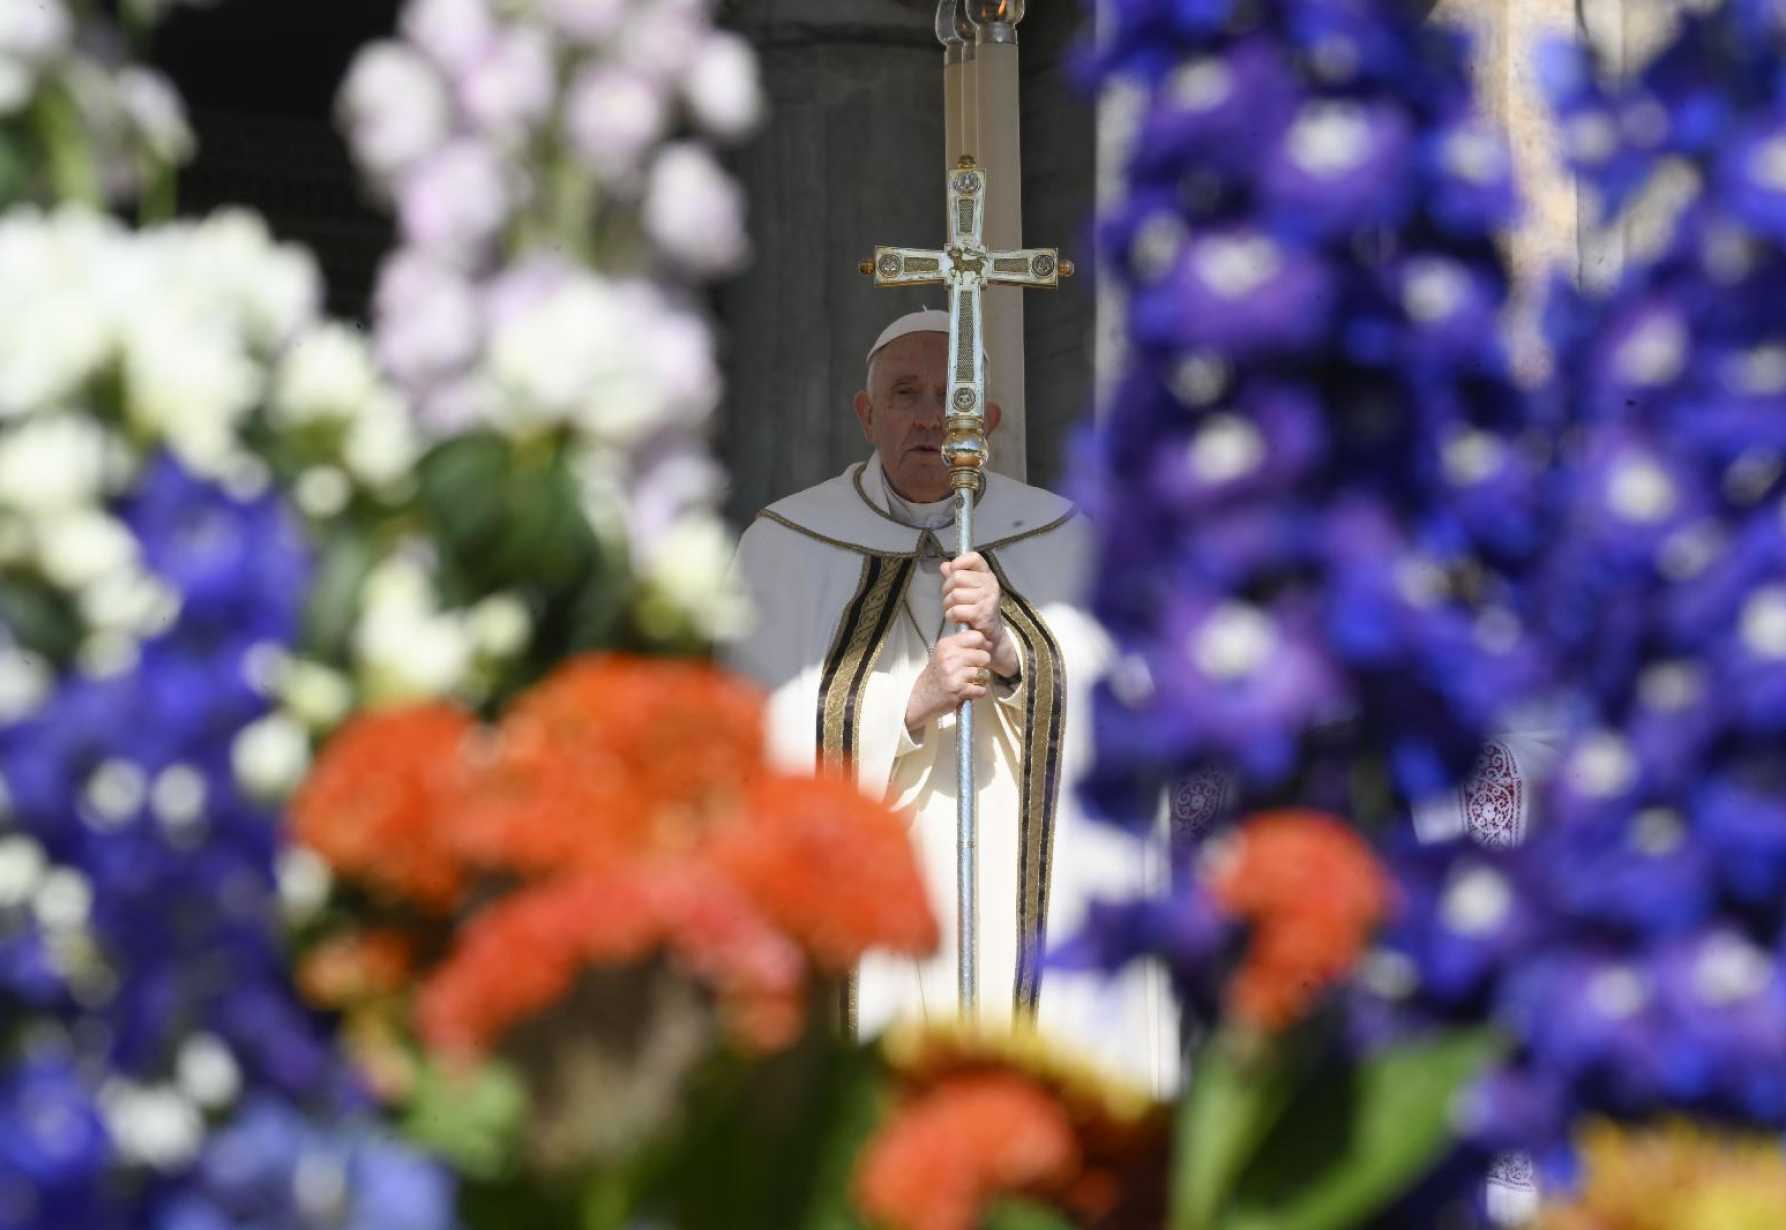 Video highlights of Pope Francis' Triduum and Easter celebrations